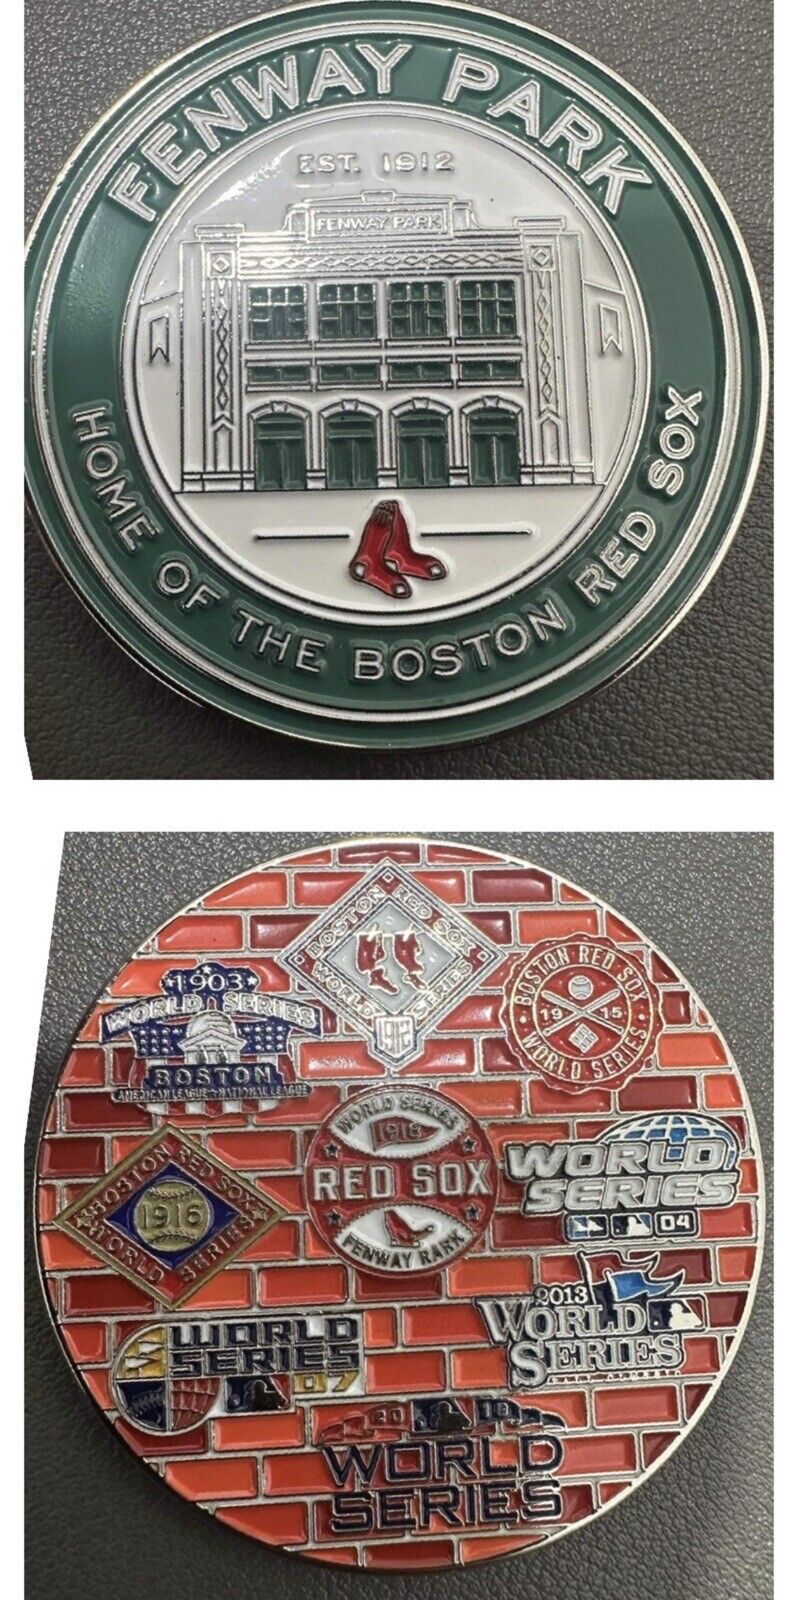 Fenway Park Championships Challenge coin